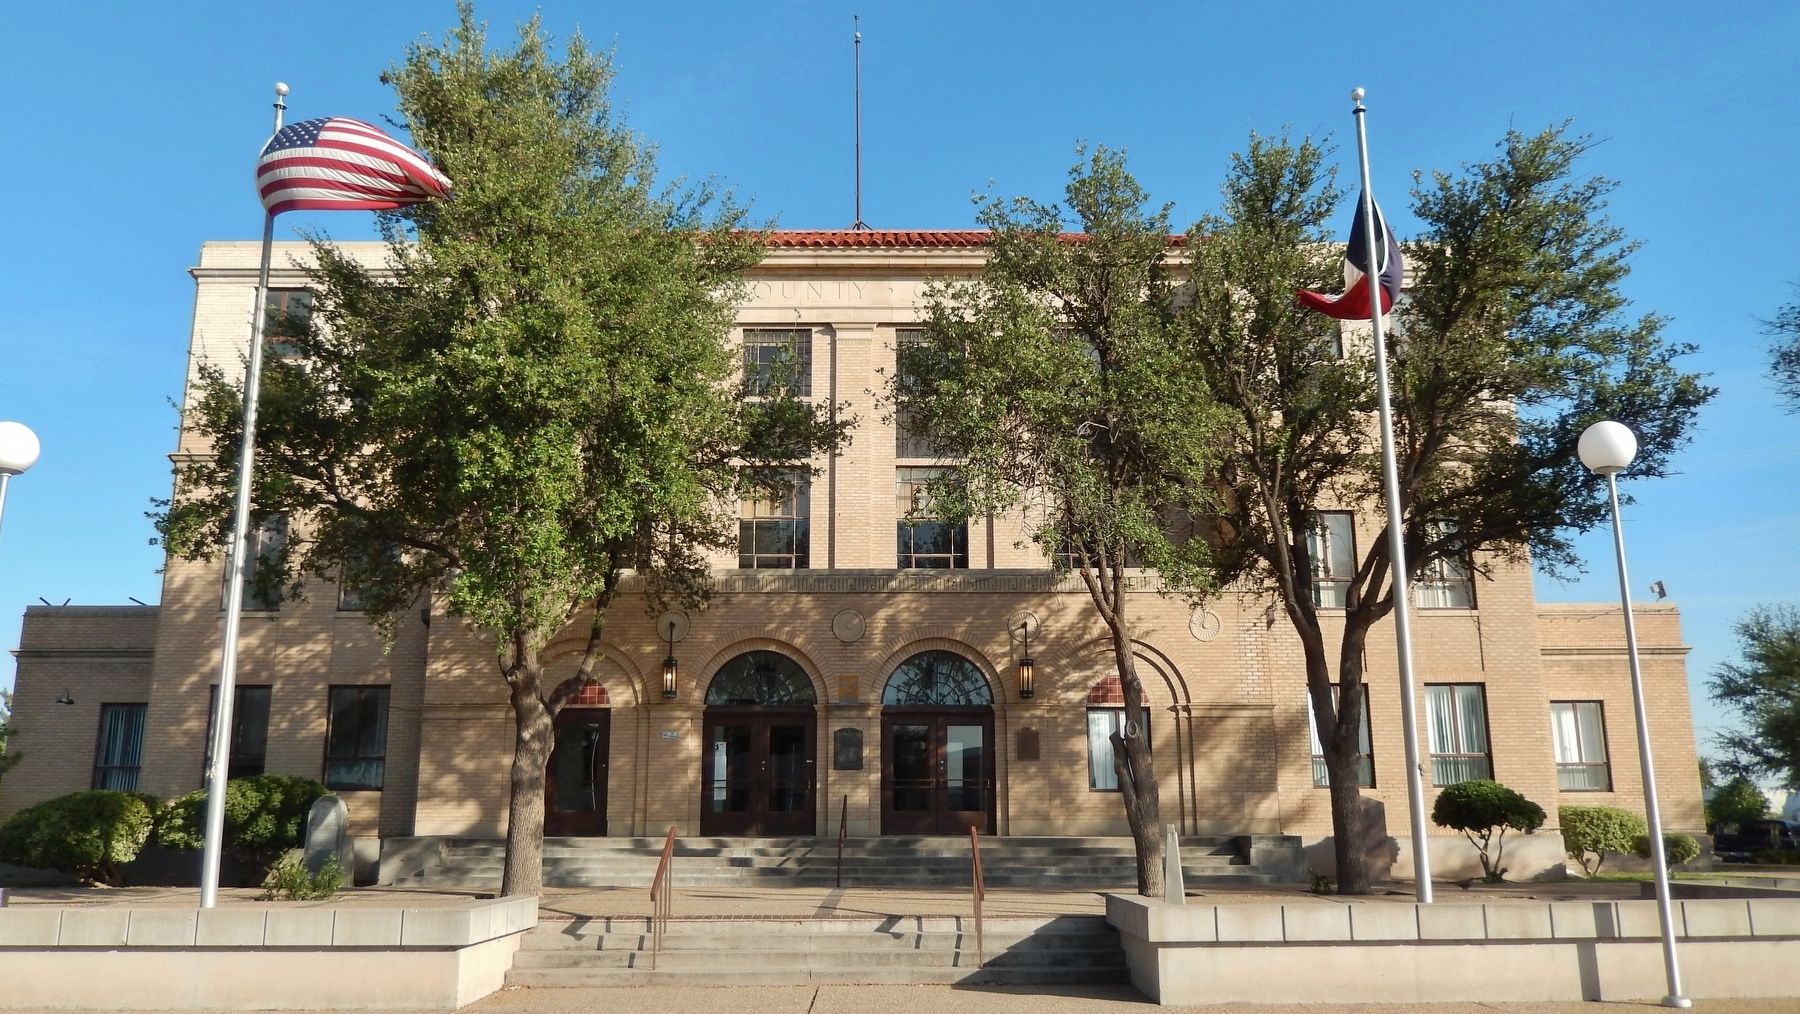 Reeves County Courthouse (<i>marker visible between front entrance doors</i>) image. Click for full size.